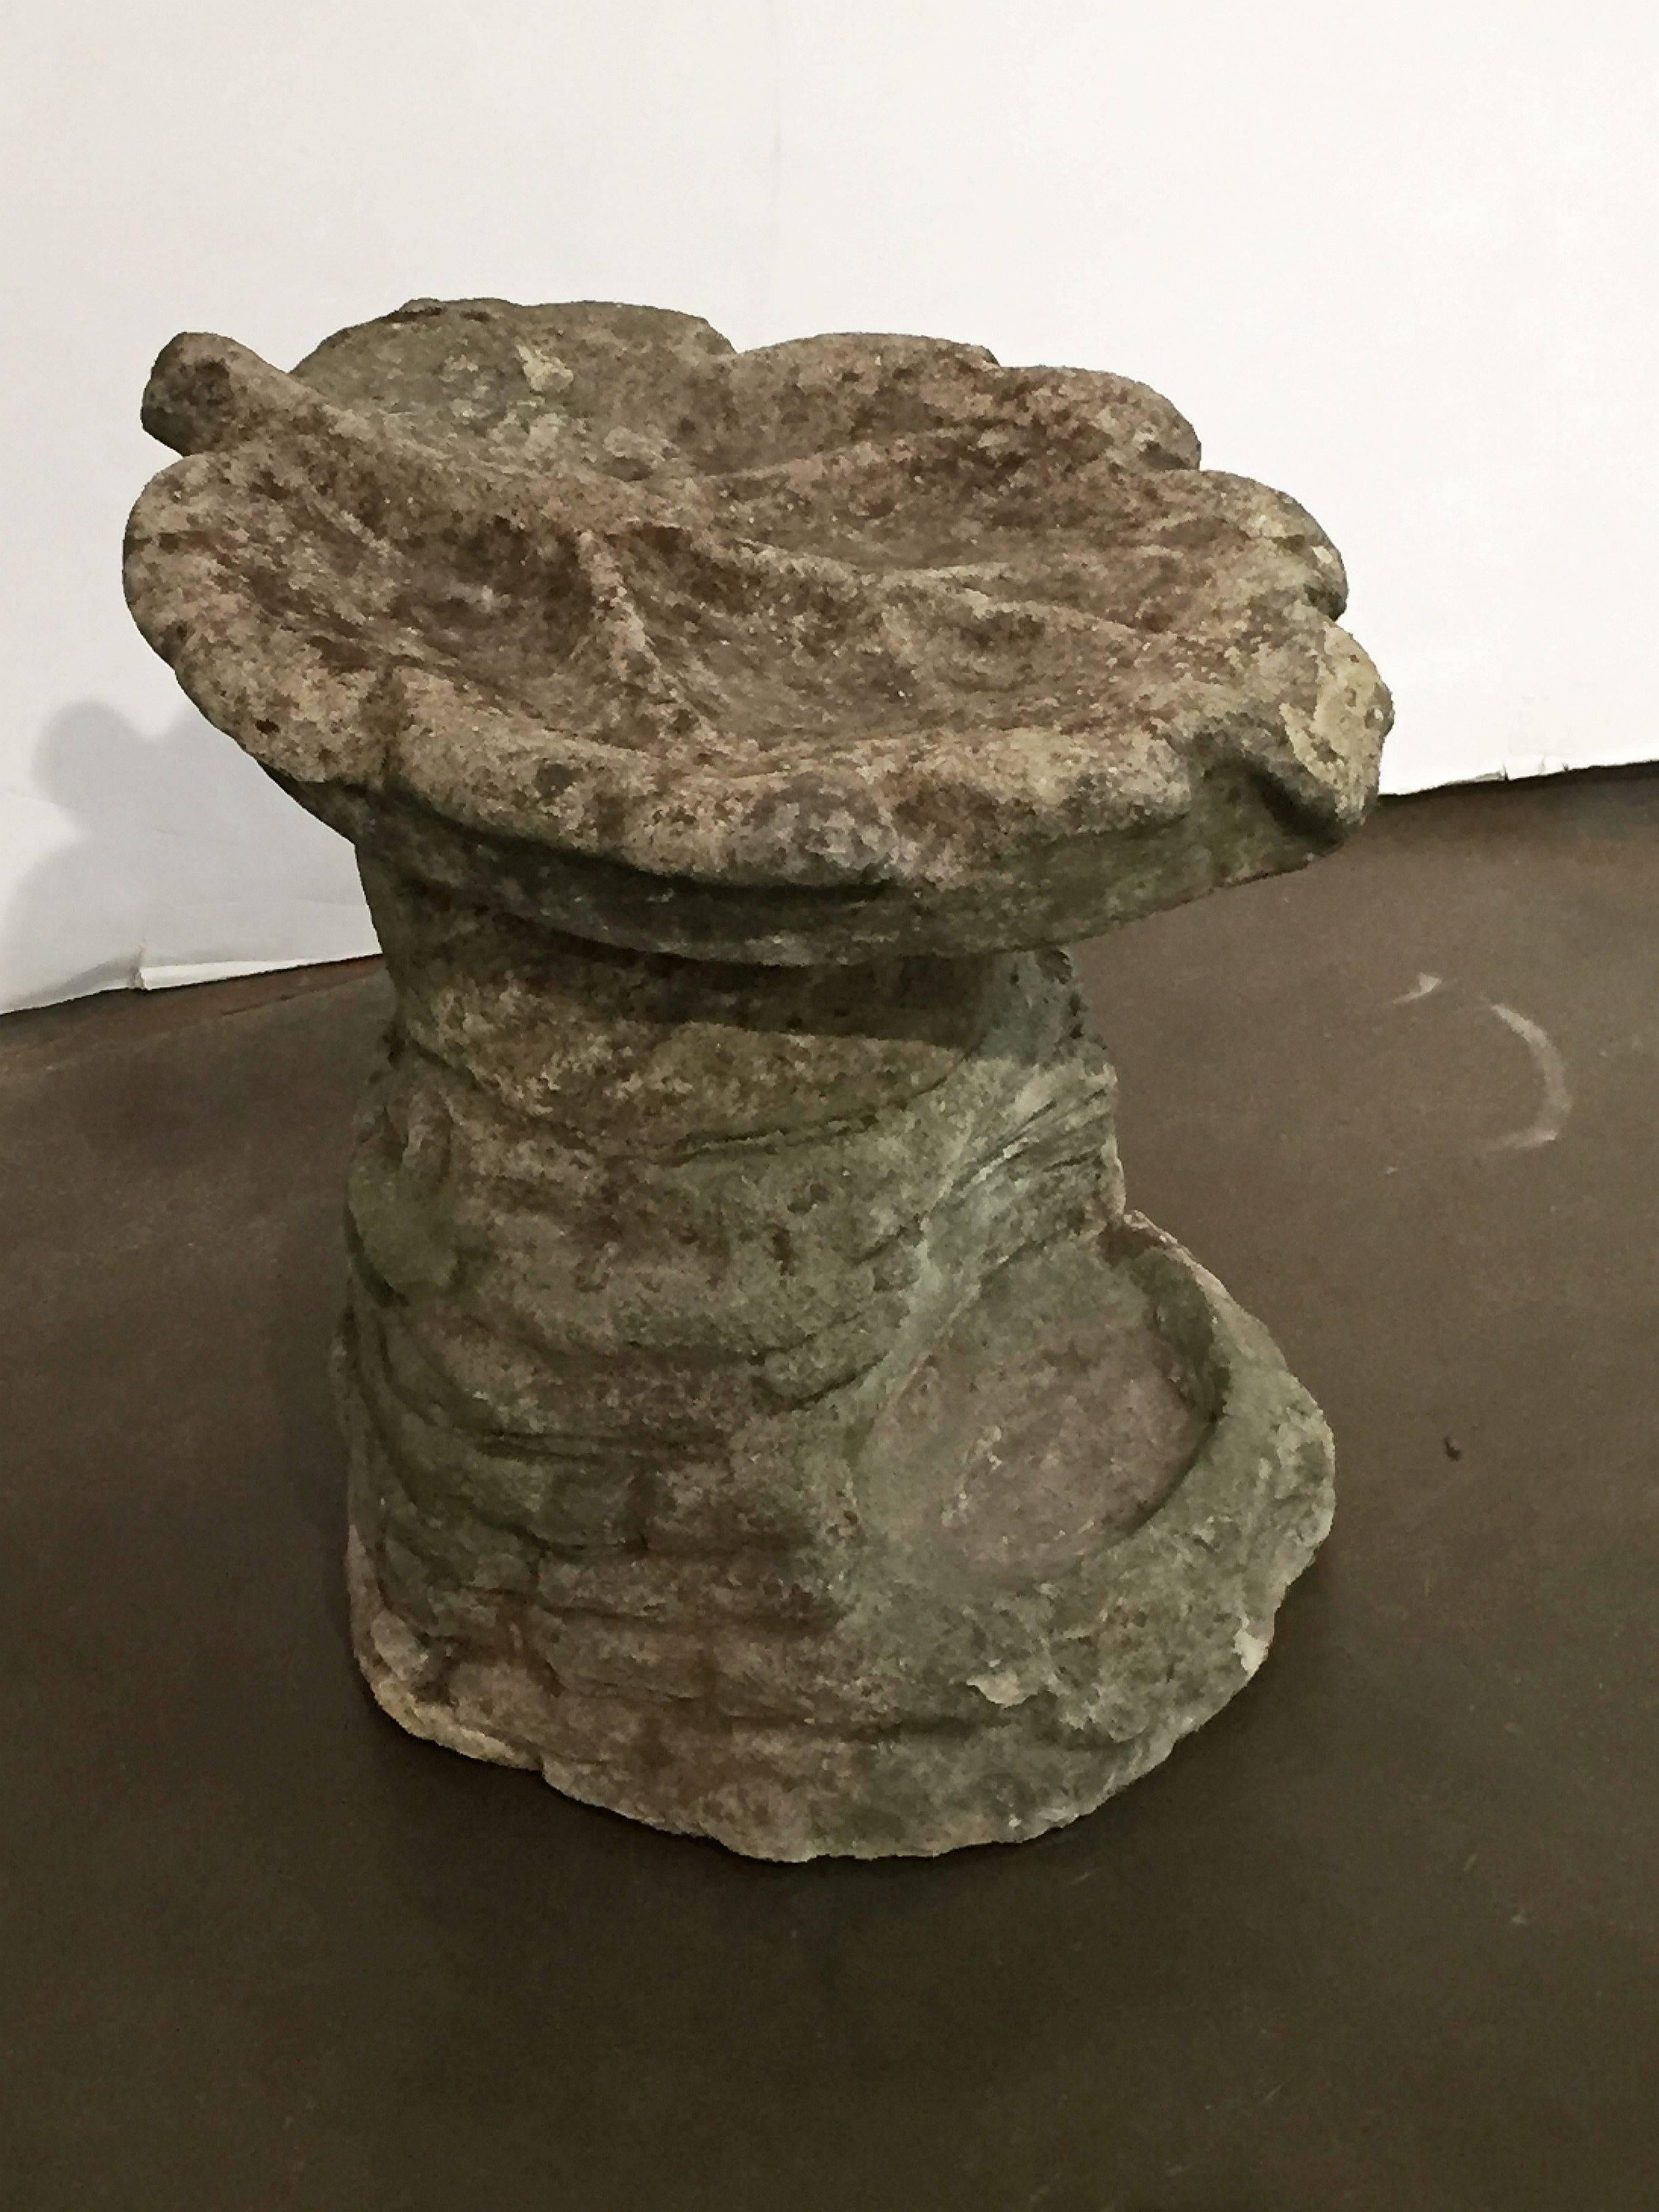 An English garden bird bath and feeder of weathered composition stone, featuring a removable top in the shape of a large oak leaf, set upon a base with a rock ledge design and recessed area for bird feed or water.